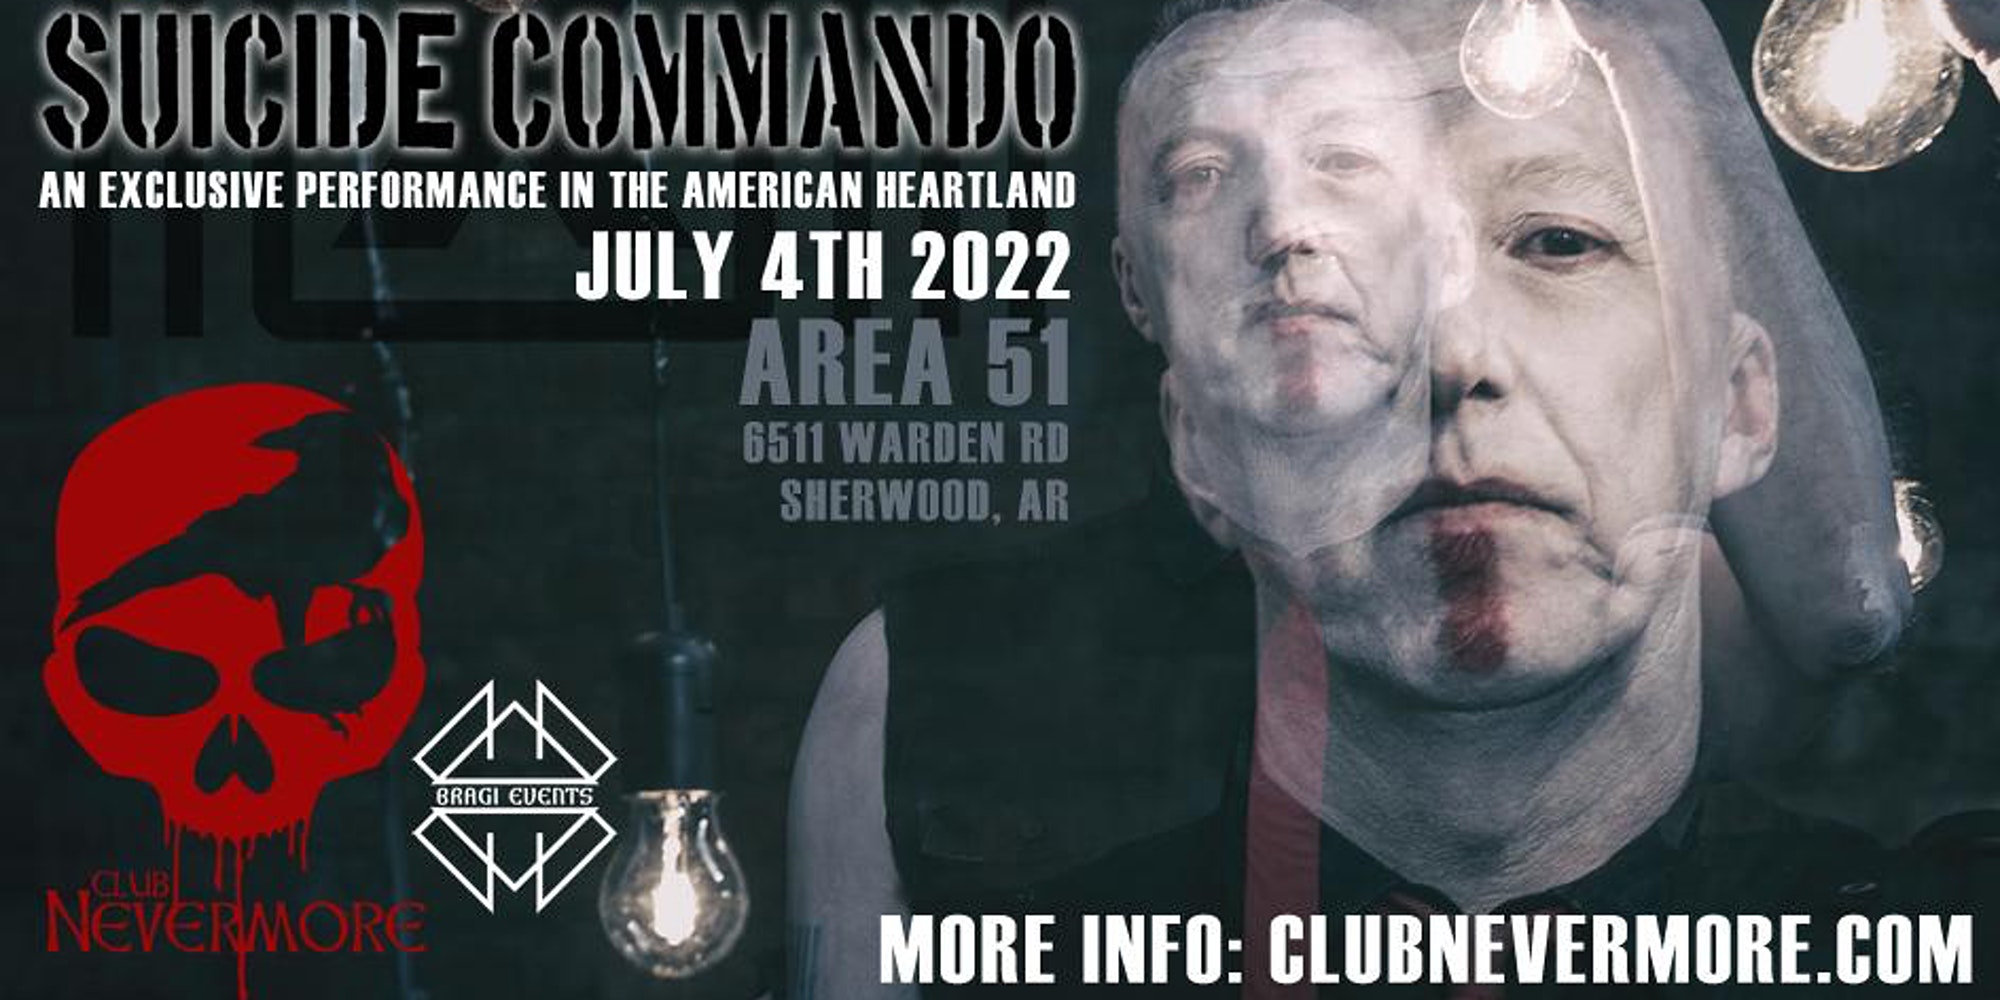 Flyer for Suicide Commando, performing at Area 51, at 6511 Warden Road in Sherwood, on July 4, 2022, presented by Club Nevermore. There is Club Nevermore&rsquo;s logo, which is a skull with a raven inside of it, on the left side. On the right side is a photo of Suicide Commando&rsquo;s Johan Van Roy, which has another photo overlaid on top, creating a double exposure-like effect.